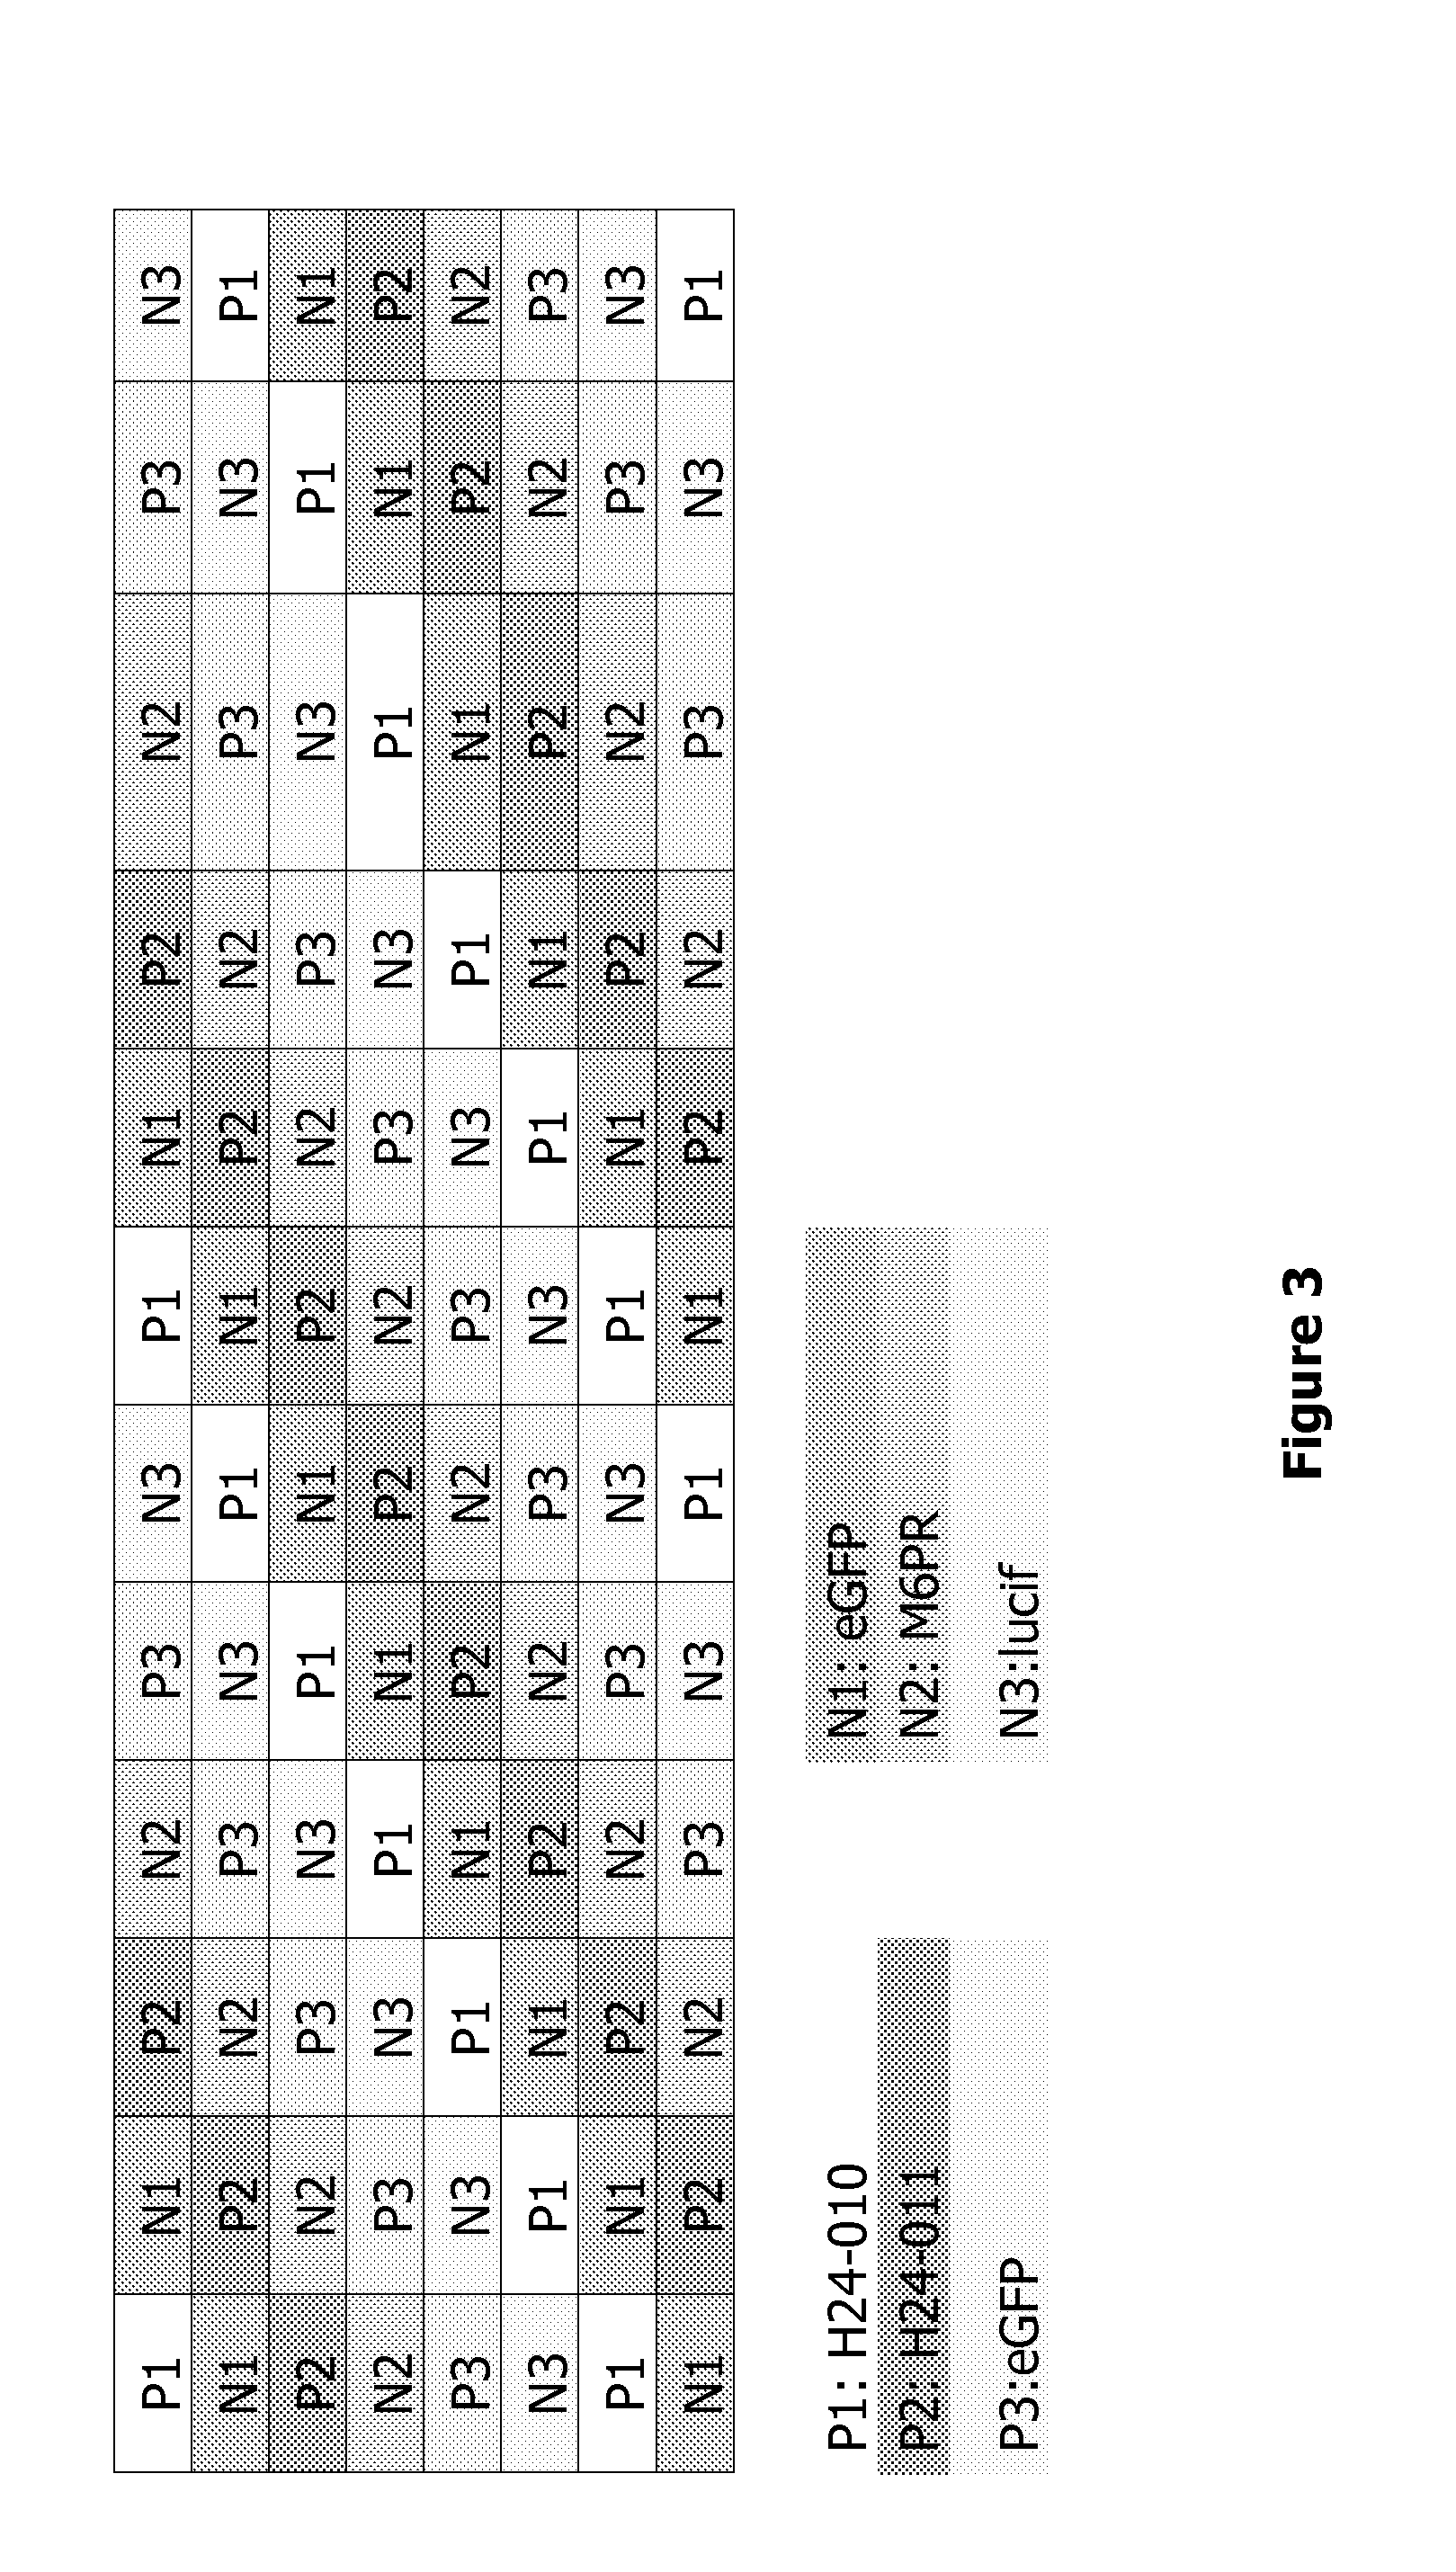 Methods, Agents, and Compound Screening Assays for Inducing Differentiation of Undifferentiated Mammalian Cells into Osteoblasts